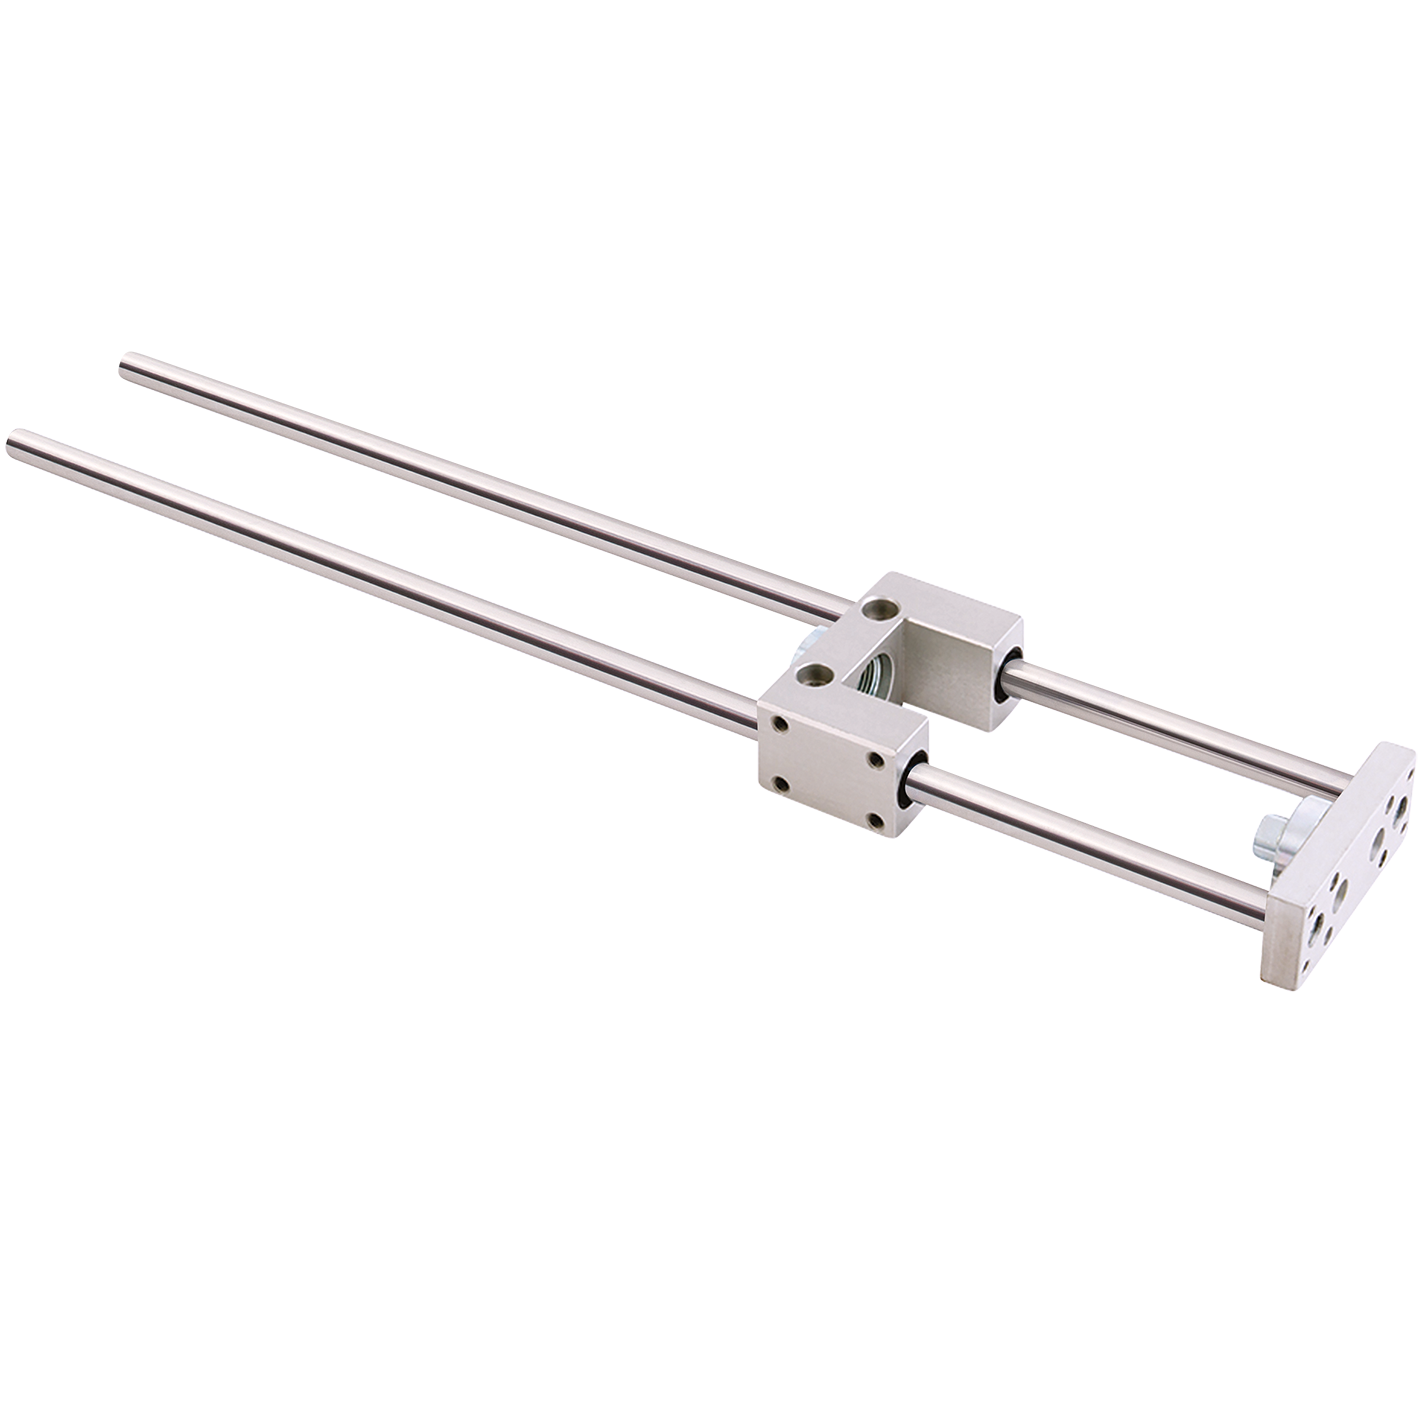 50mm Bore x 250mm Stroke Cylinder Guide Unit